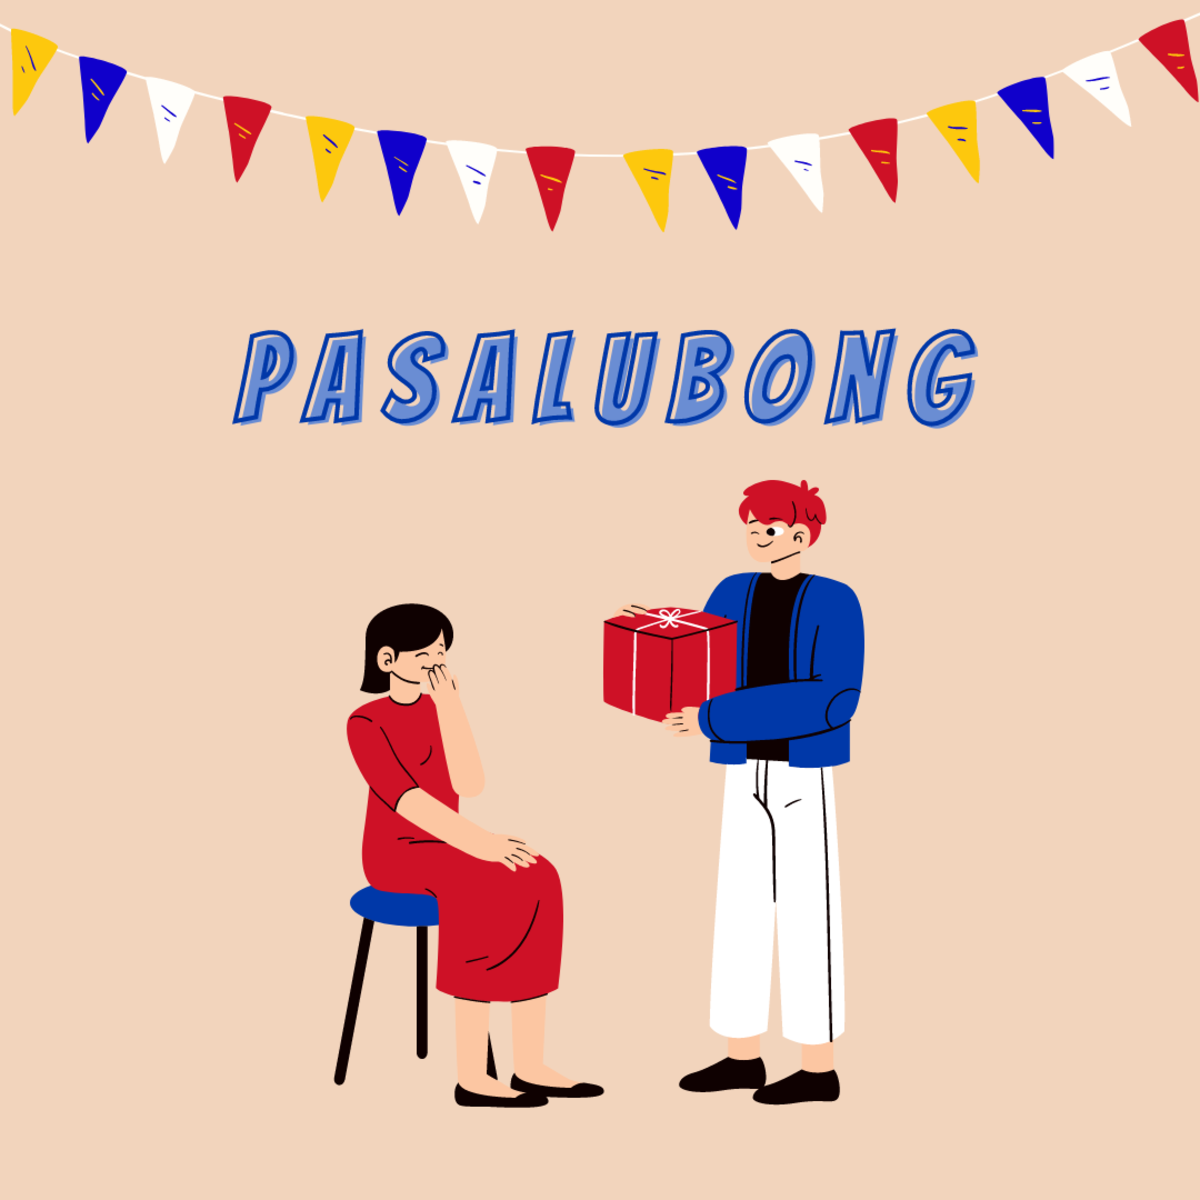 "Pasalubong"—souvenirs from a vacation; casual gifts